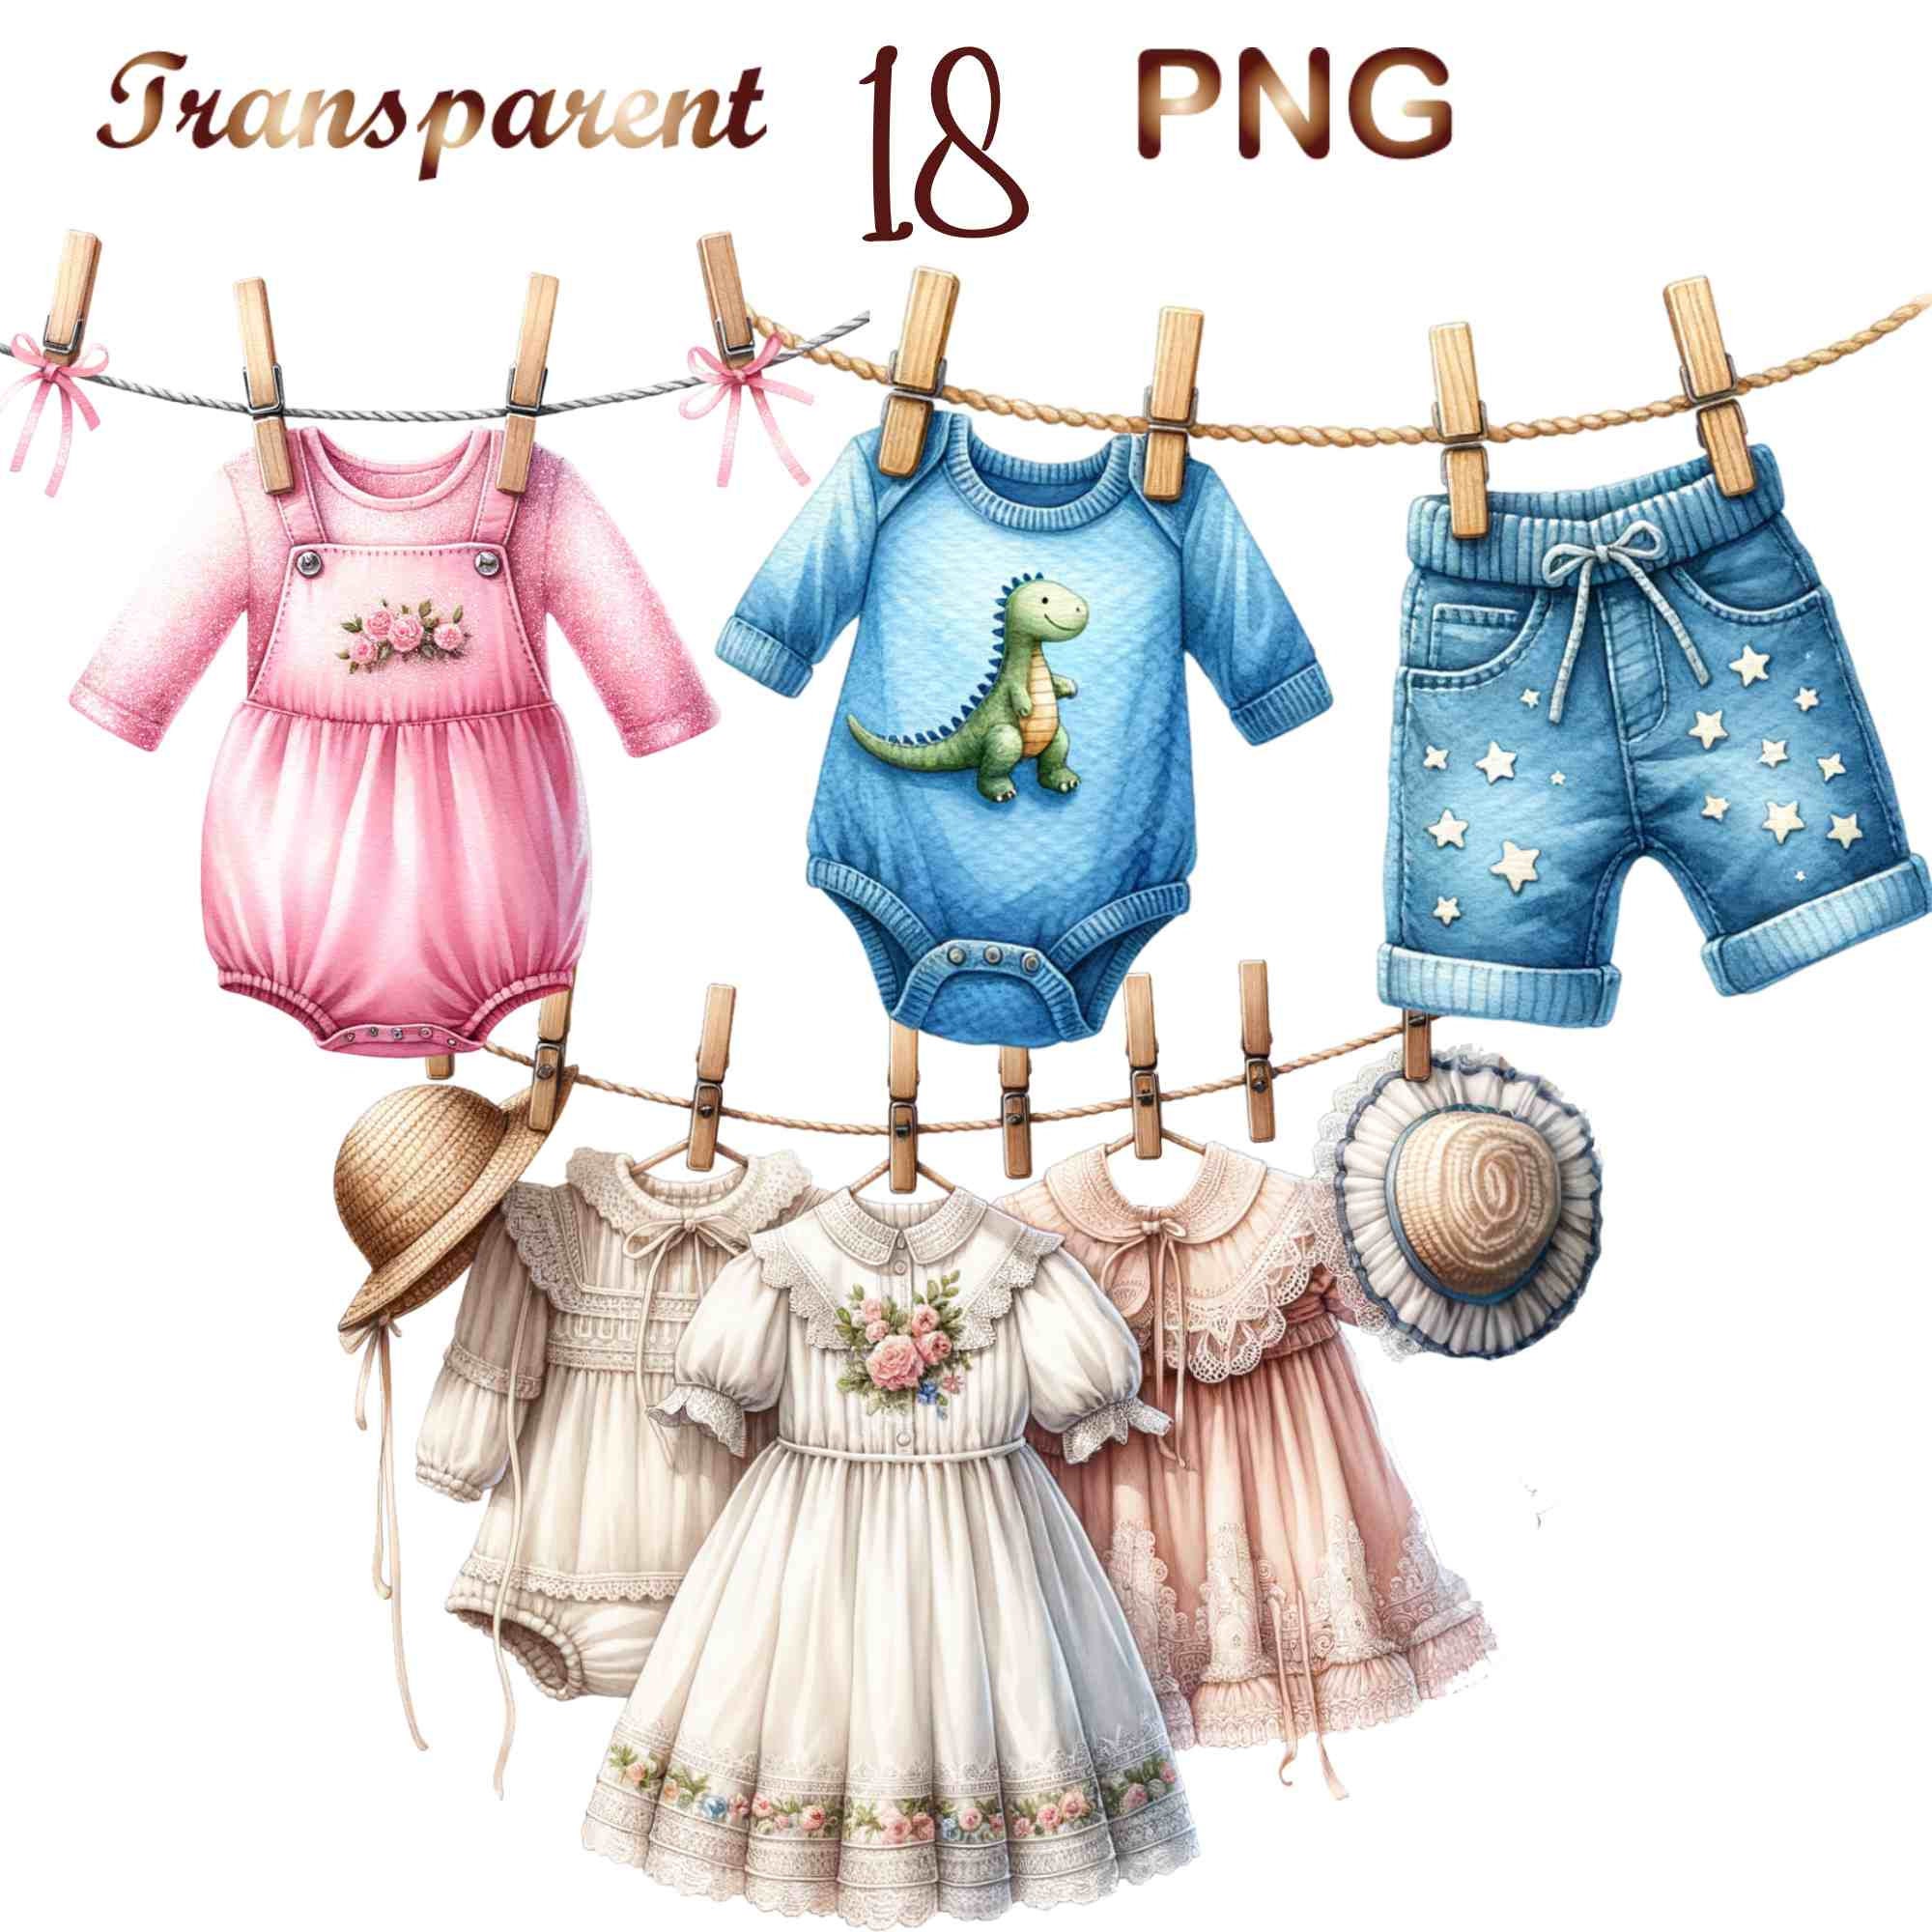 Baby Clothes Hanging Clipart Transparent PNG Hd, Cute Baby Clothes Hanging  On The Rope, Baby Shower, Fashion, Cute PNG Image For Free Download